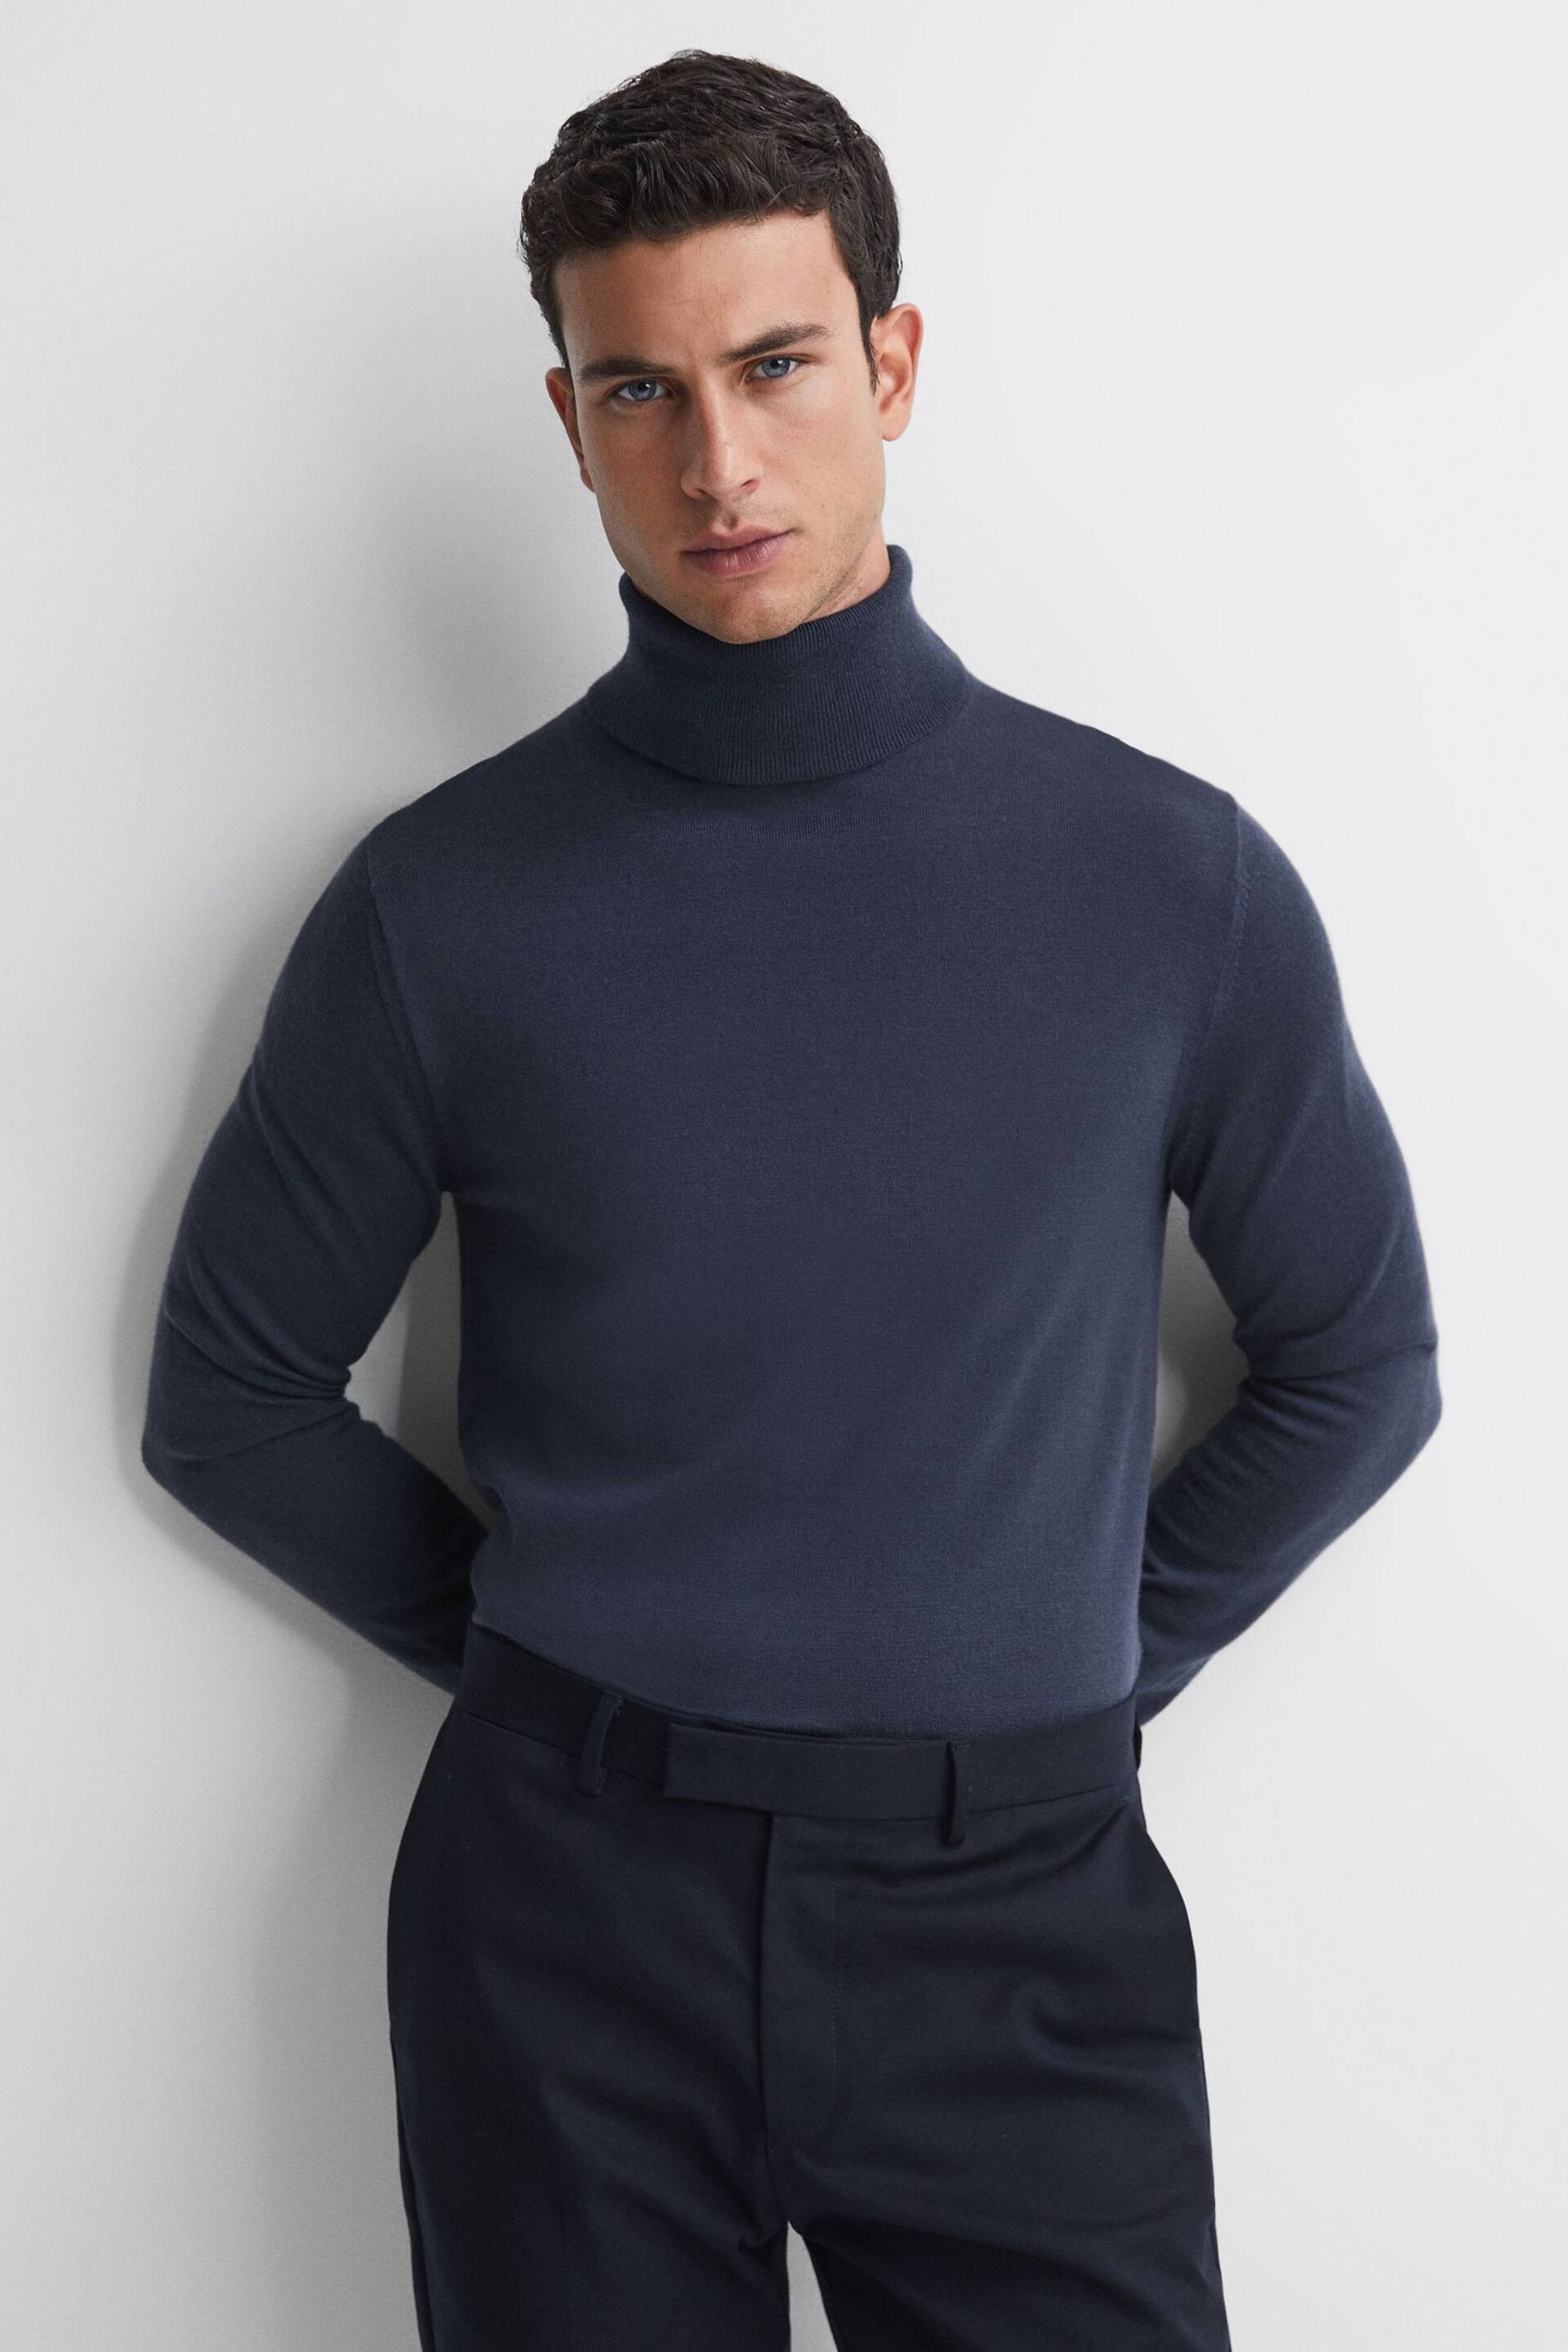 Reiss Eclipse Blue Caine Slim Fit Merino Wool Roll Neck Jumper - Image 1 of 5